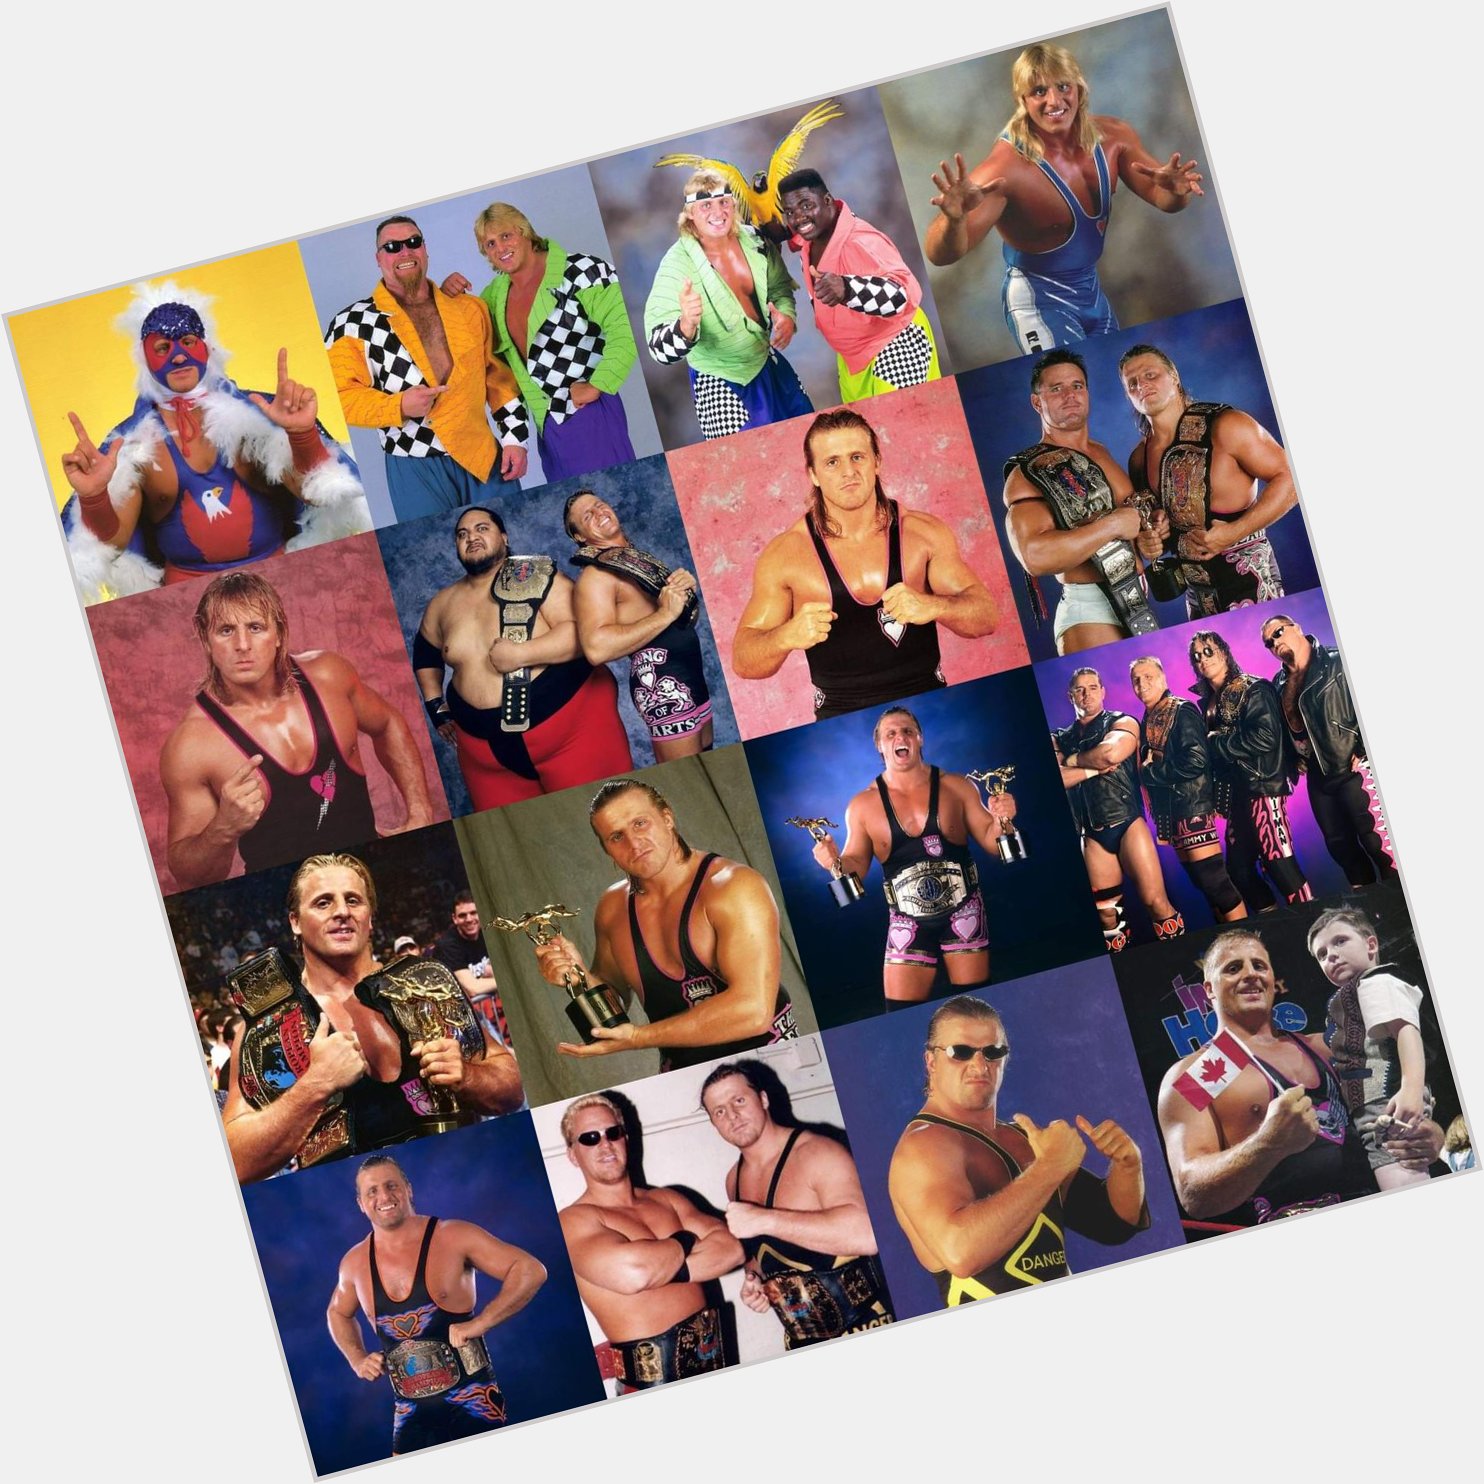 Happy birthday to the late, great Owen Hart. 